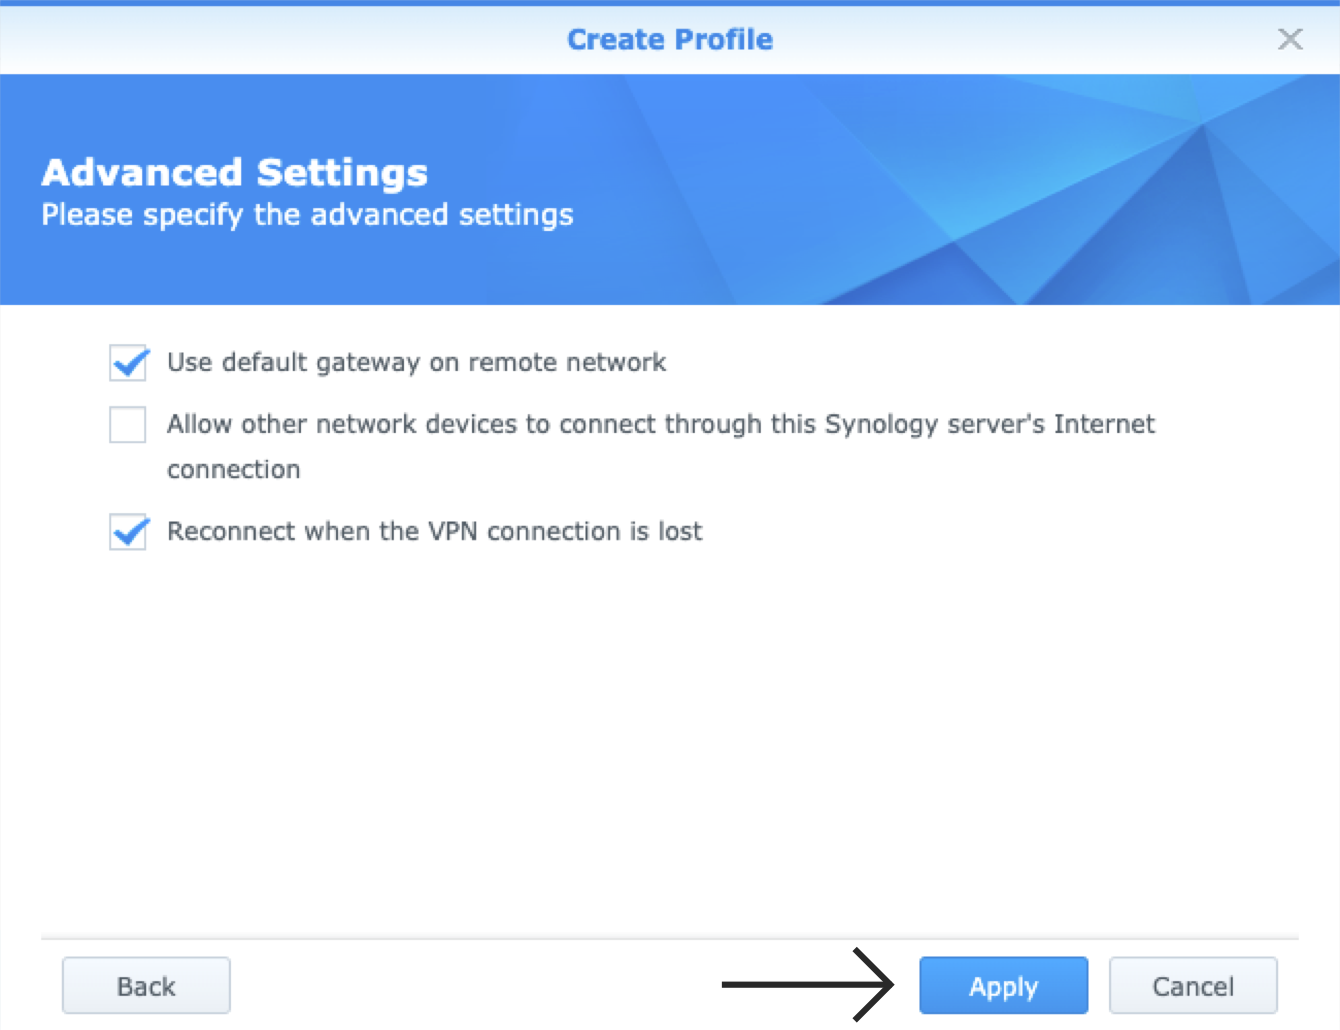 Click “Apply” to continue with your OpenVPN settings.